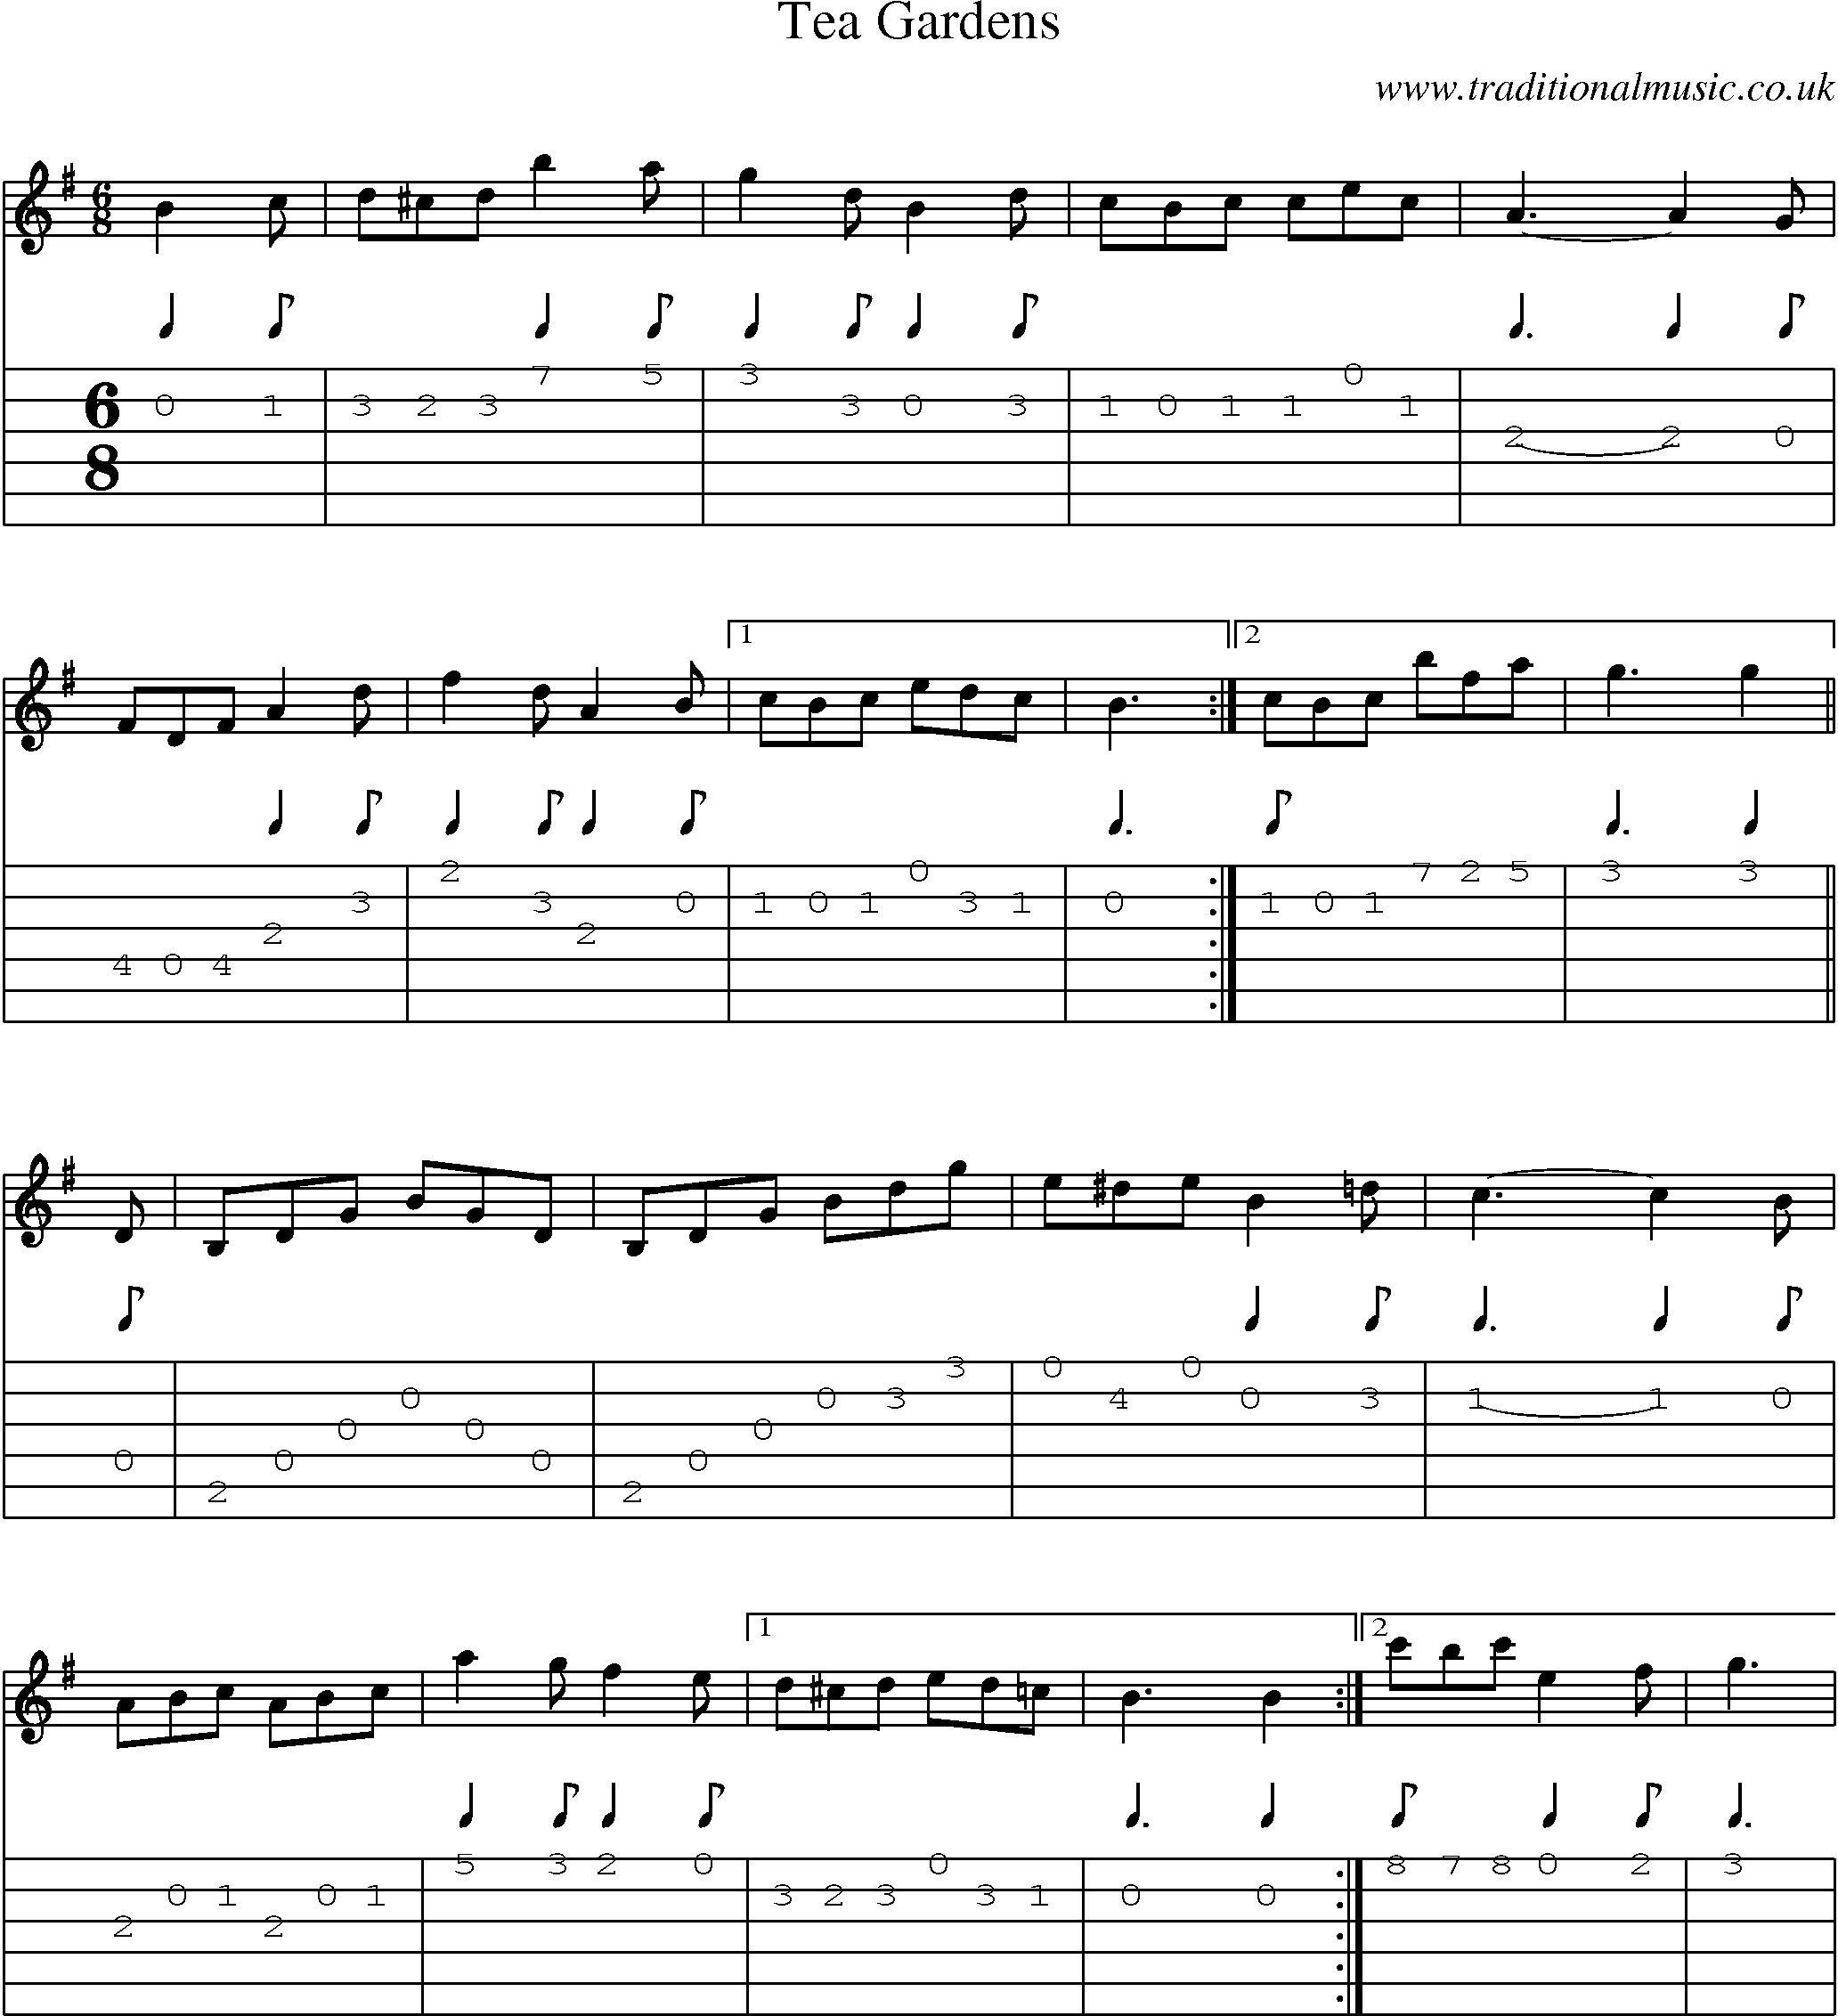 Music Score and Guitar Tabs for Tea Gardens